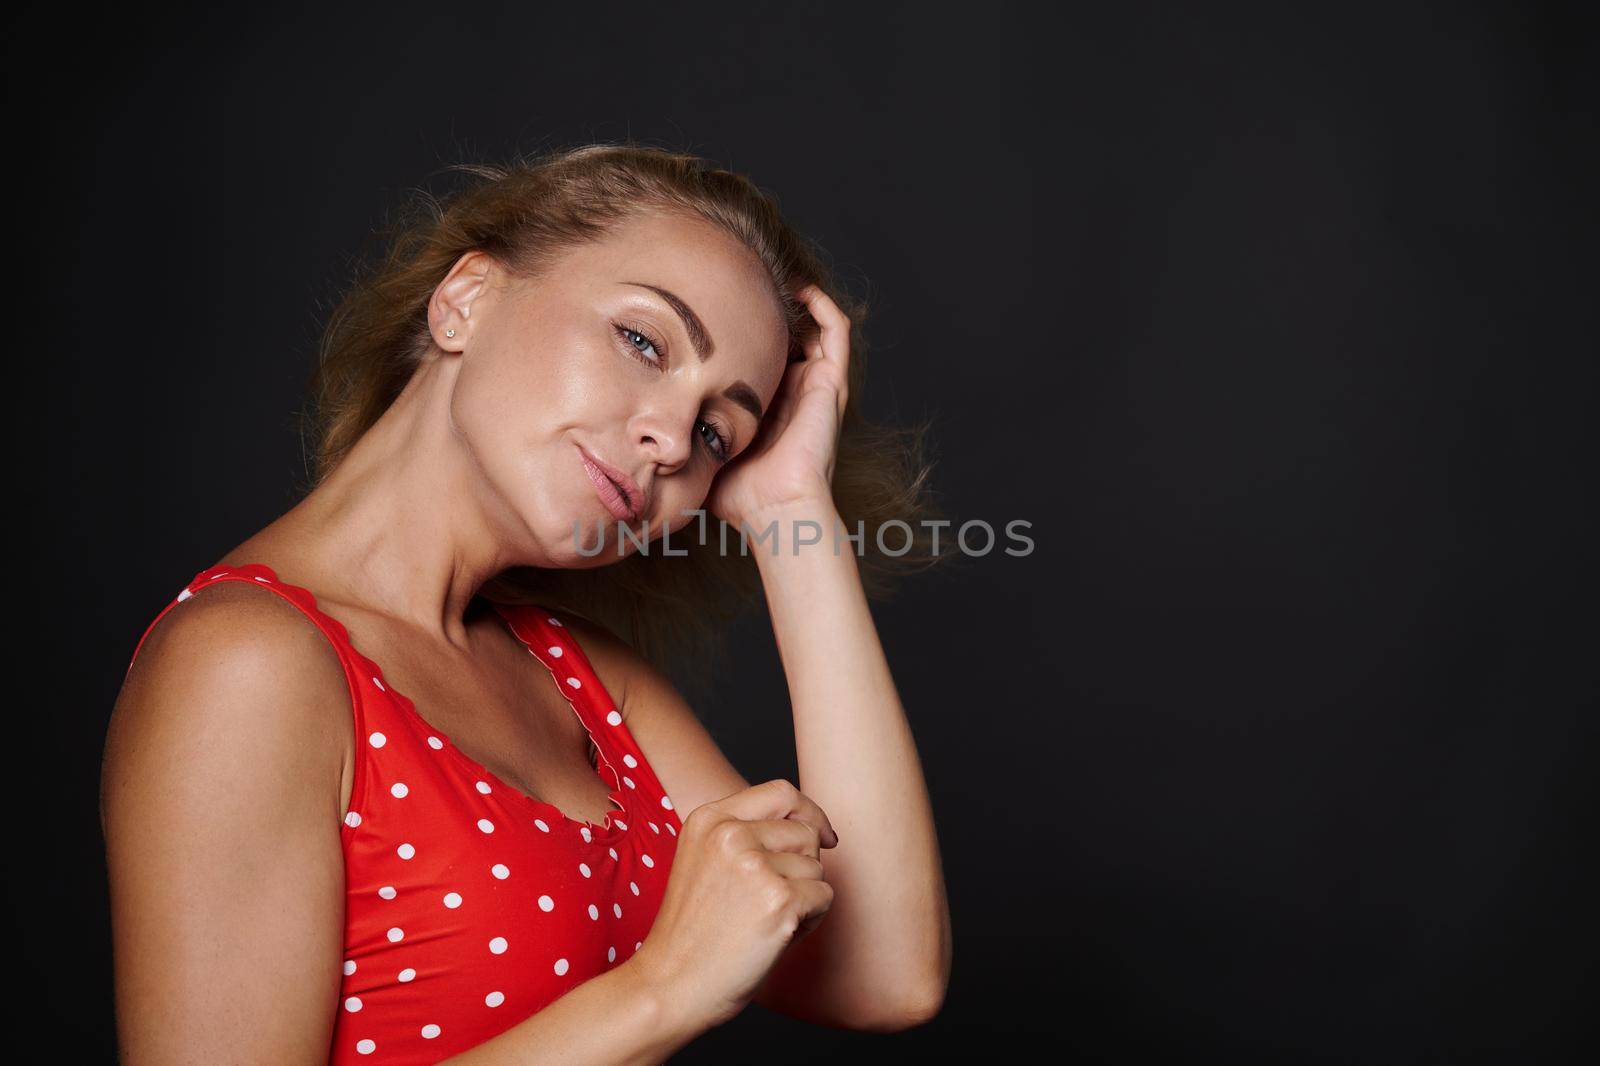 Beautiful Caucasian woman with healthy clean fresh glowing tanned skin and blond shiny straight hair, natural makeup, wearing red swimsuit with white polka dots isolated on black background